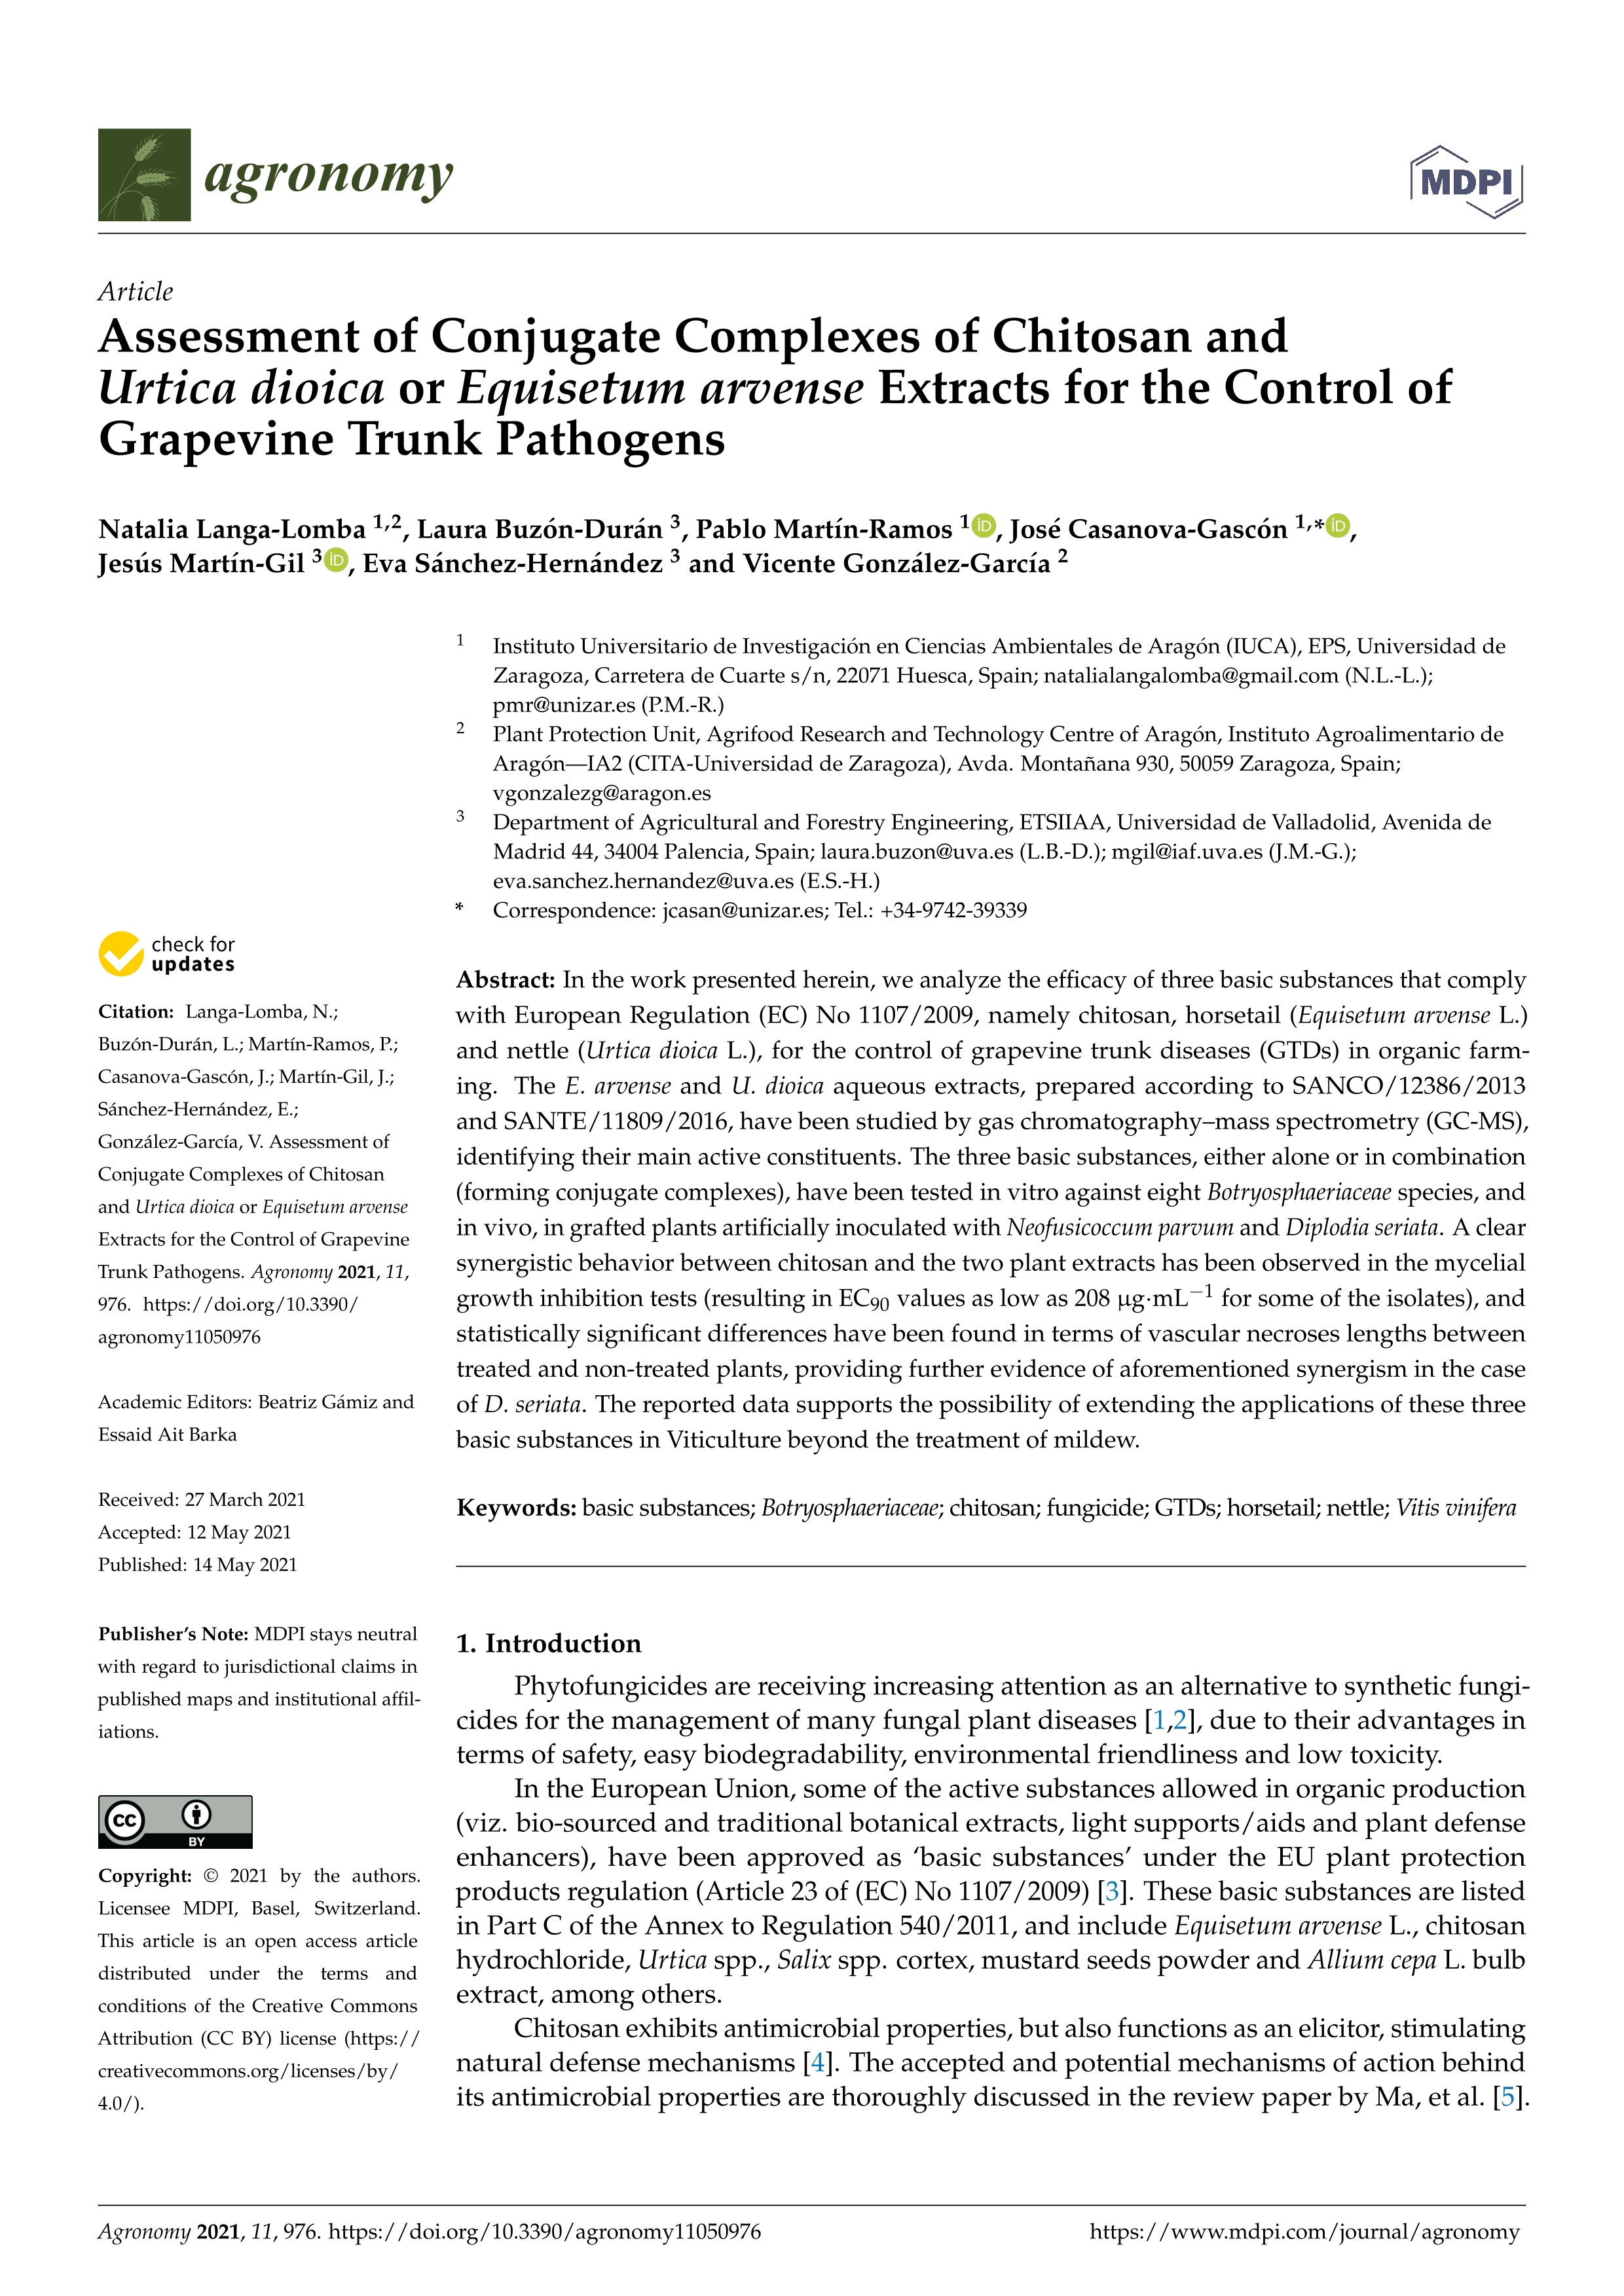 Assessment of conjugate complexes of chitosan and Urtica dioica or Equisetum arvense extracts for the control of grapevine trunk pathogens